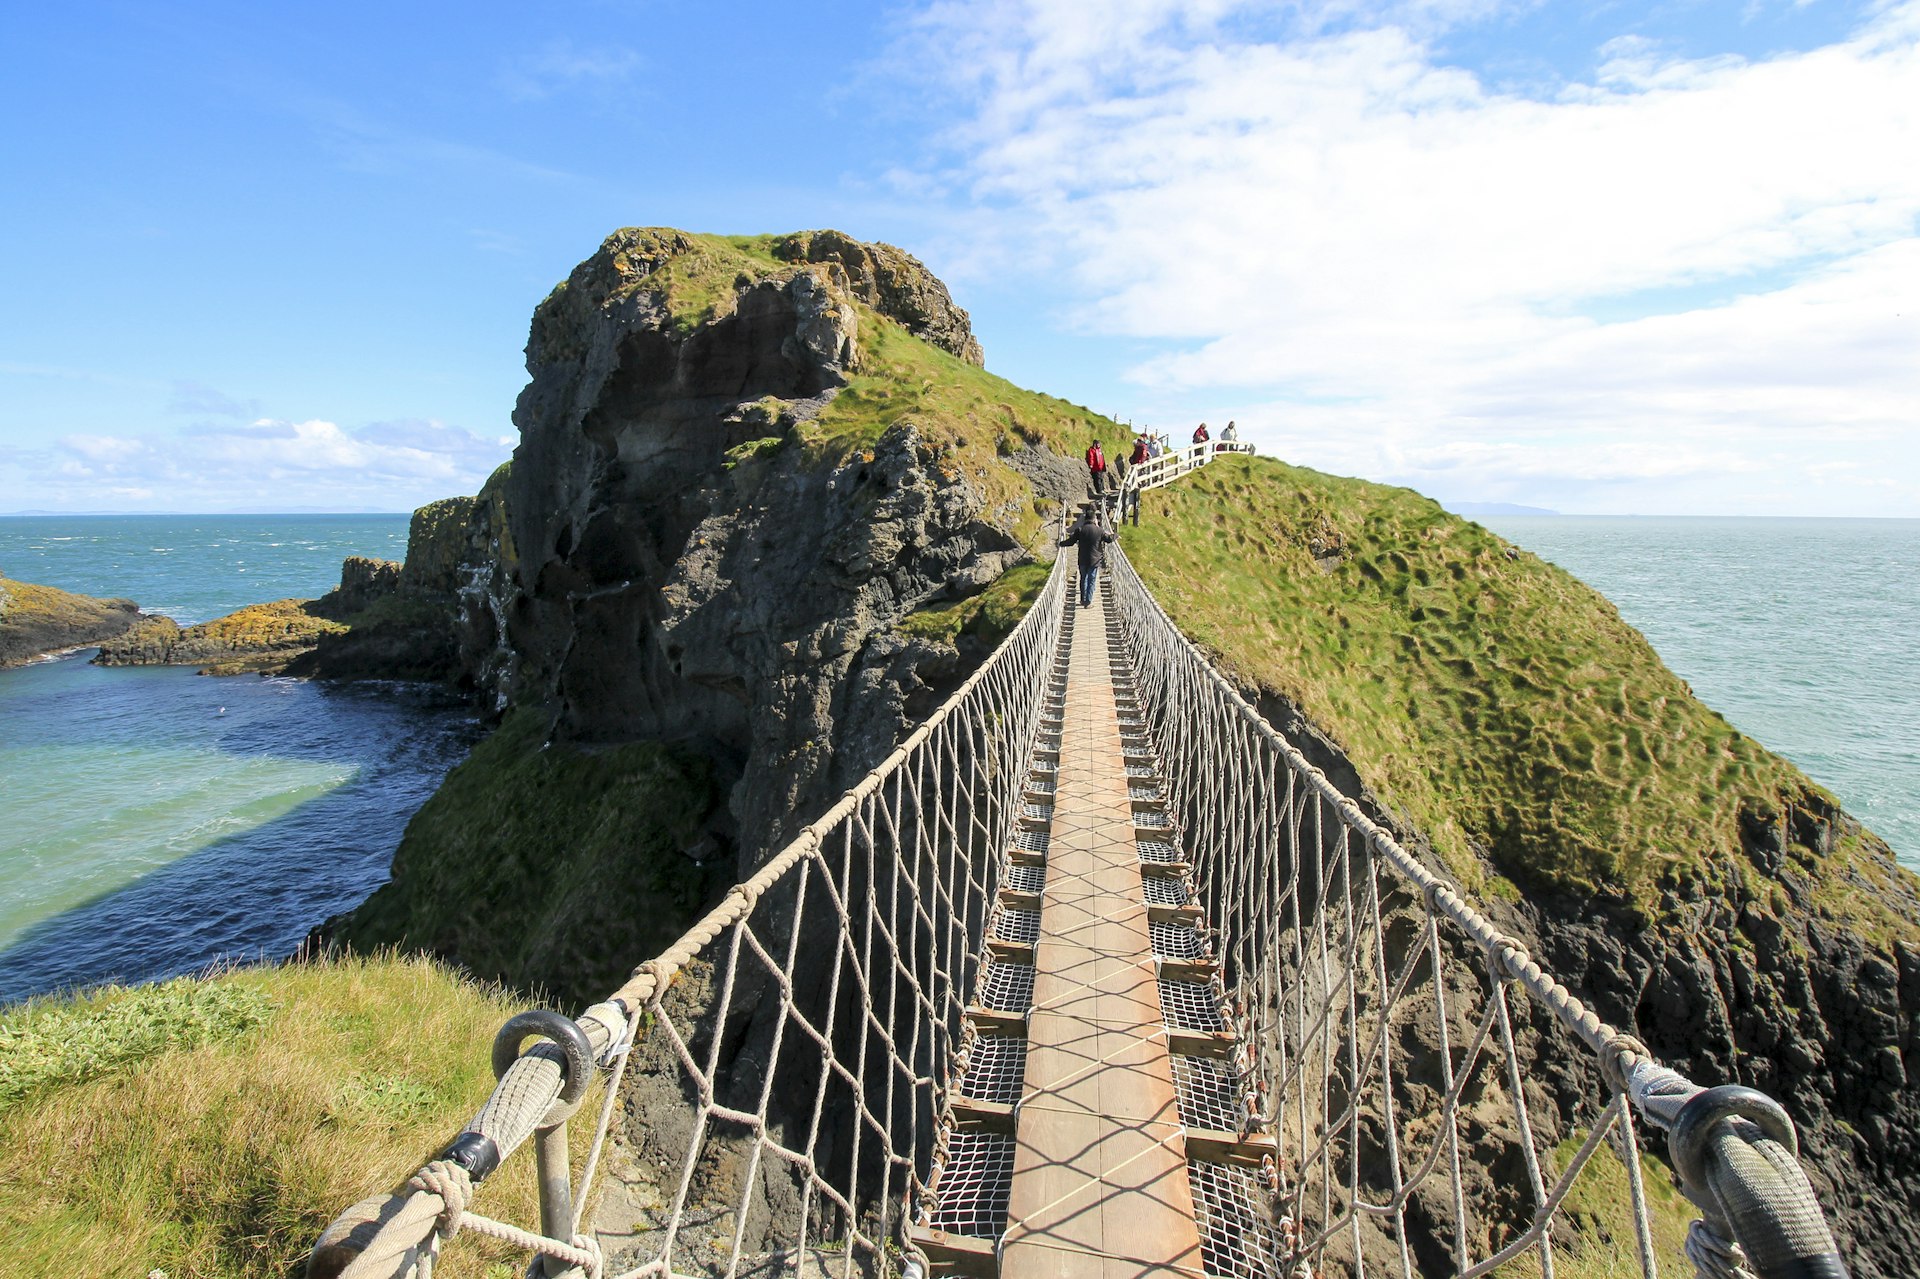 Features - Standing on Carrick-a-Rede Rope Bridge, a famous rope bridge near Ballintoy in County Antrim, Northern Ireland, UK